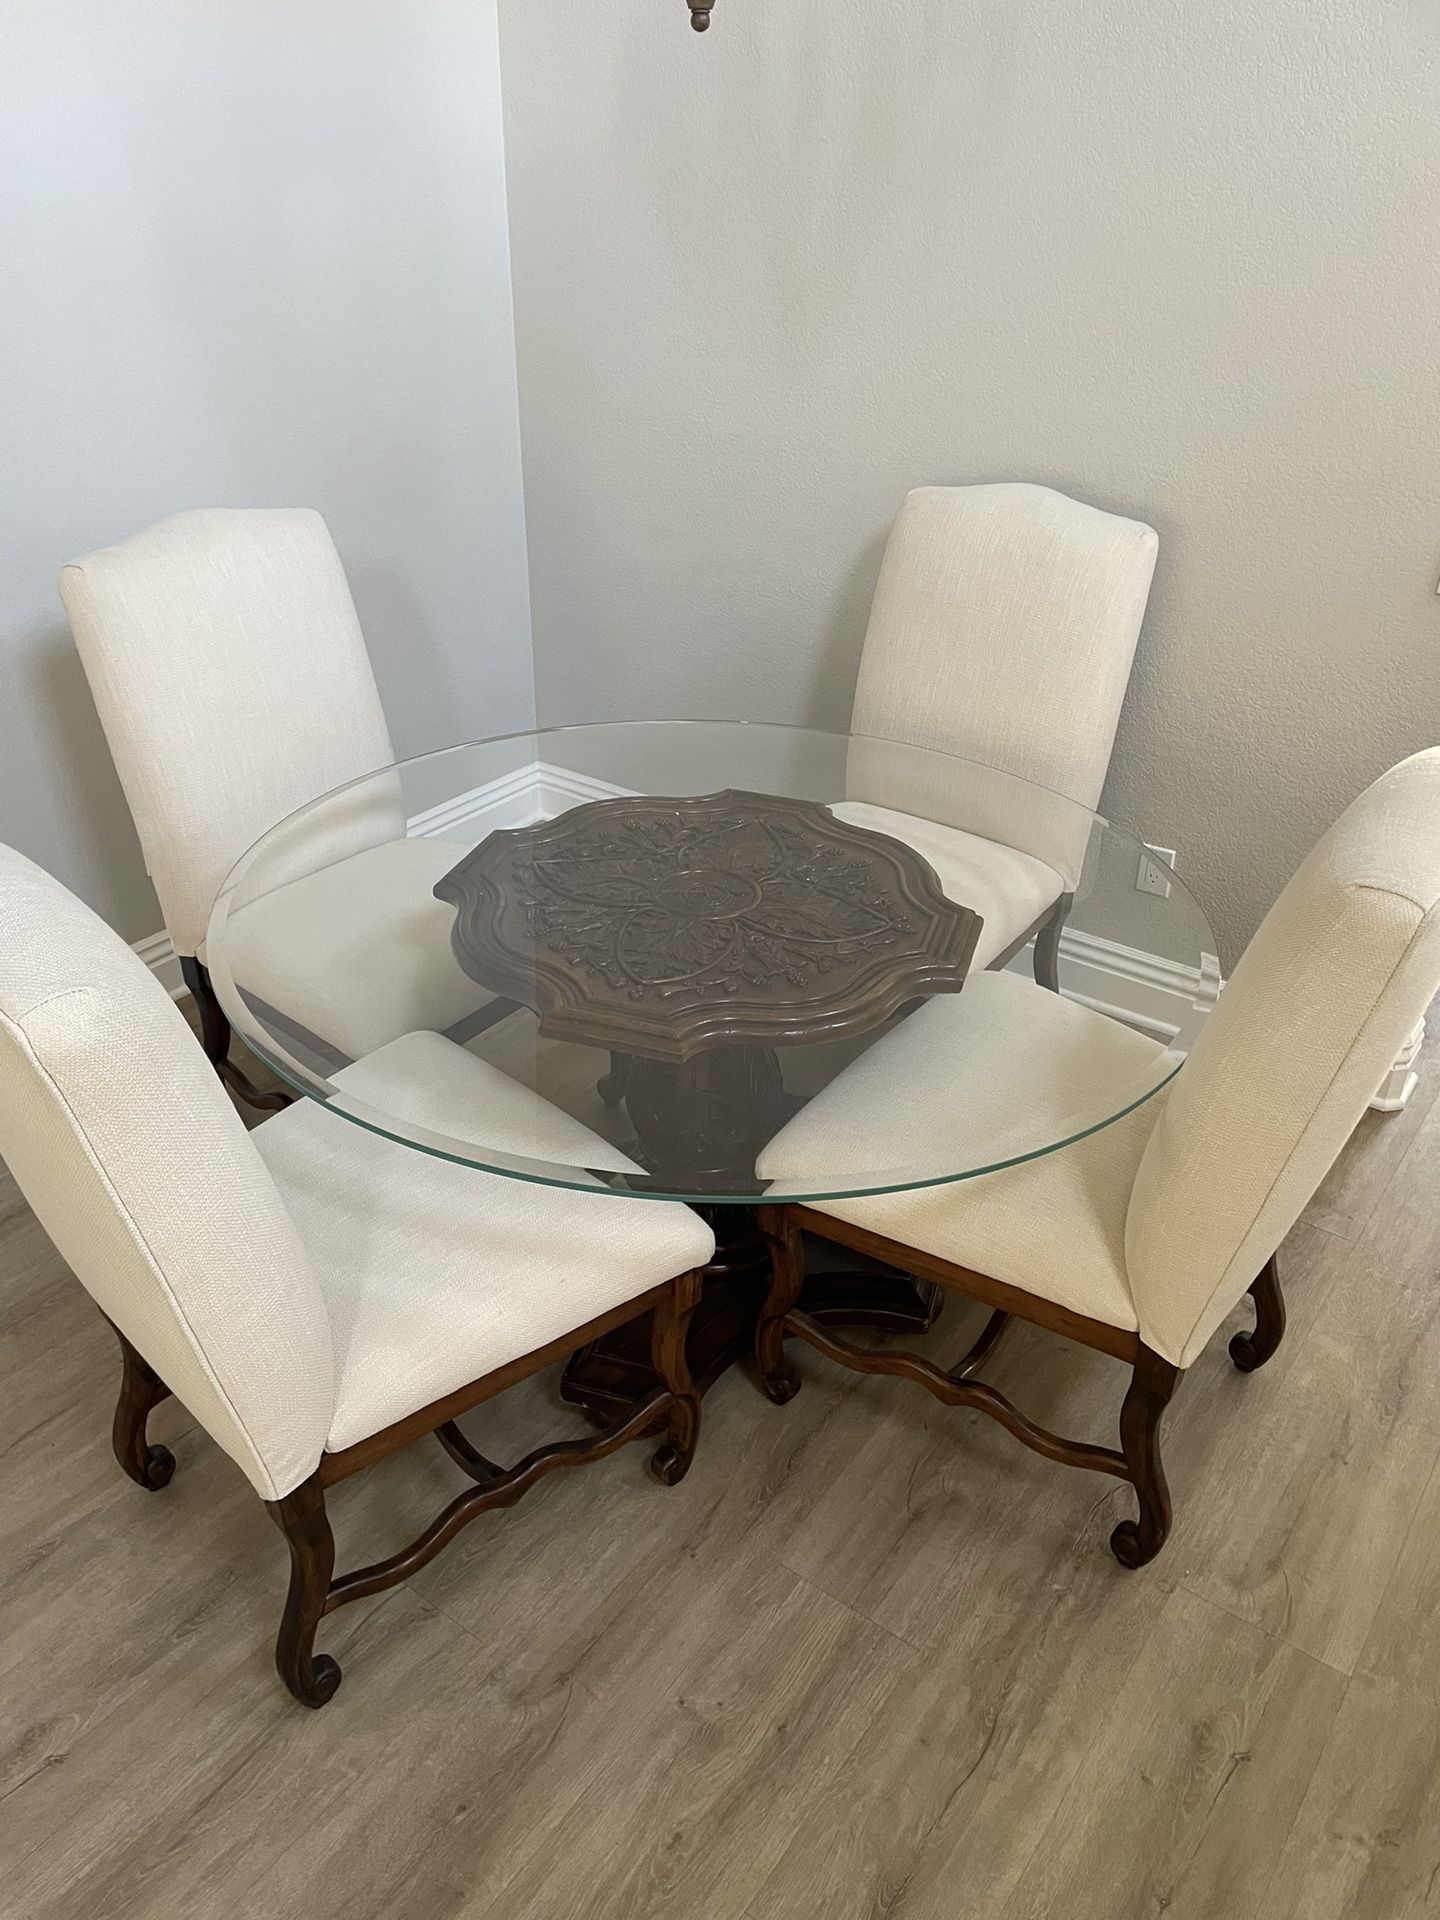 Dining Table And / Or Chairs